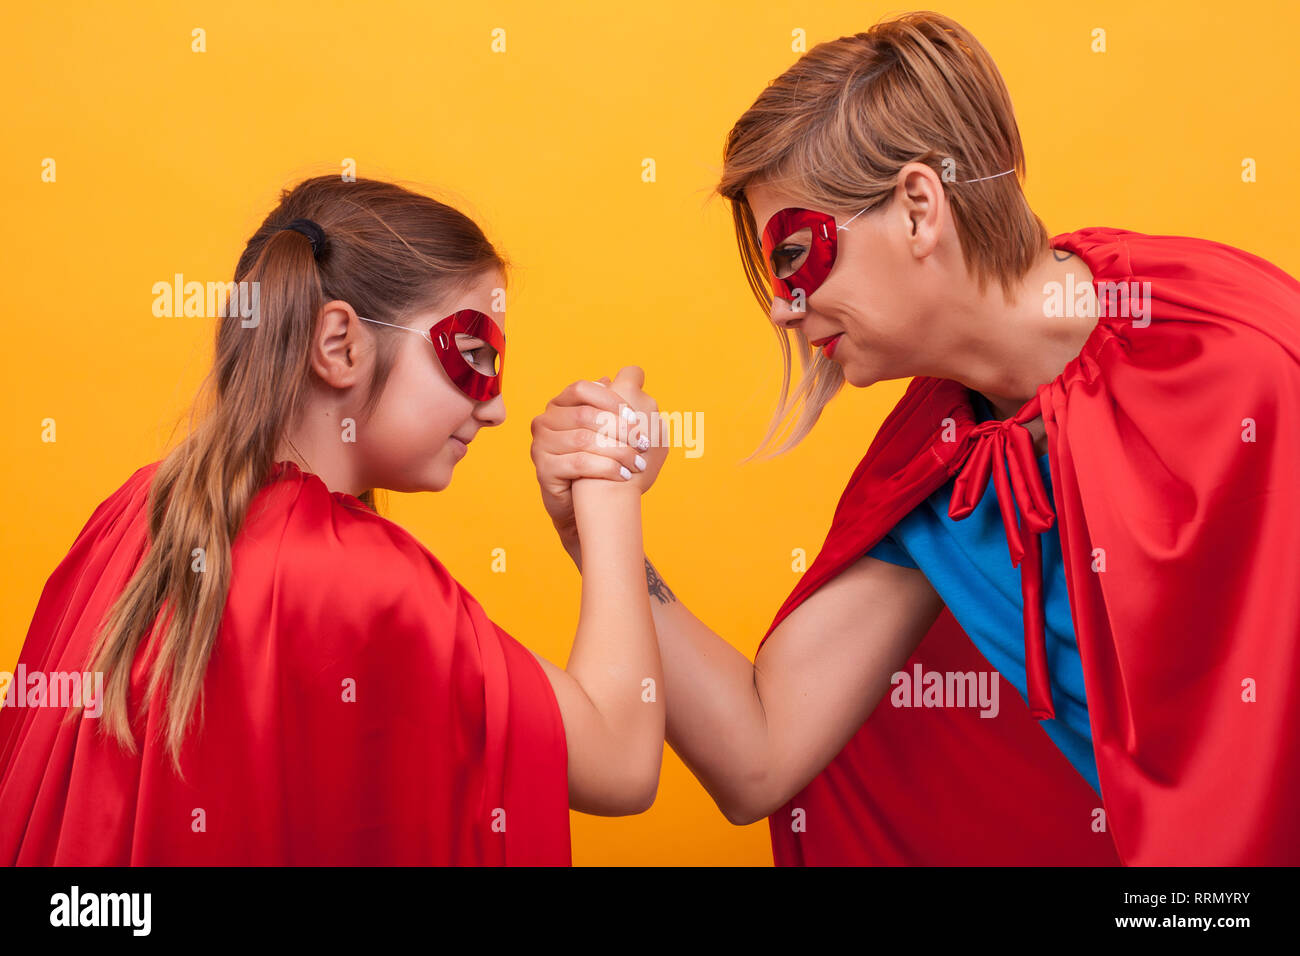 Mother and daughter dressed like superheroes playing arm wrestling over yellow background. Super mom. Super daughter. Red cape. Red mask. Parenting. Stock Photo